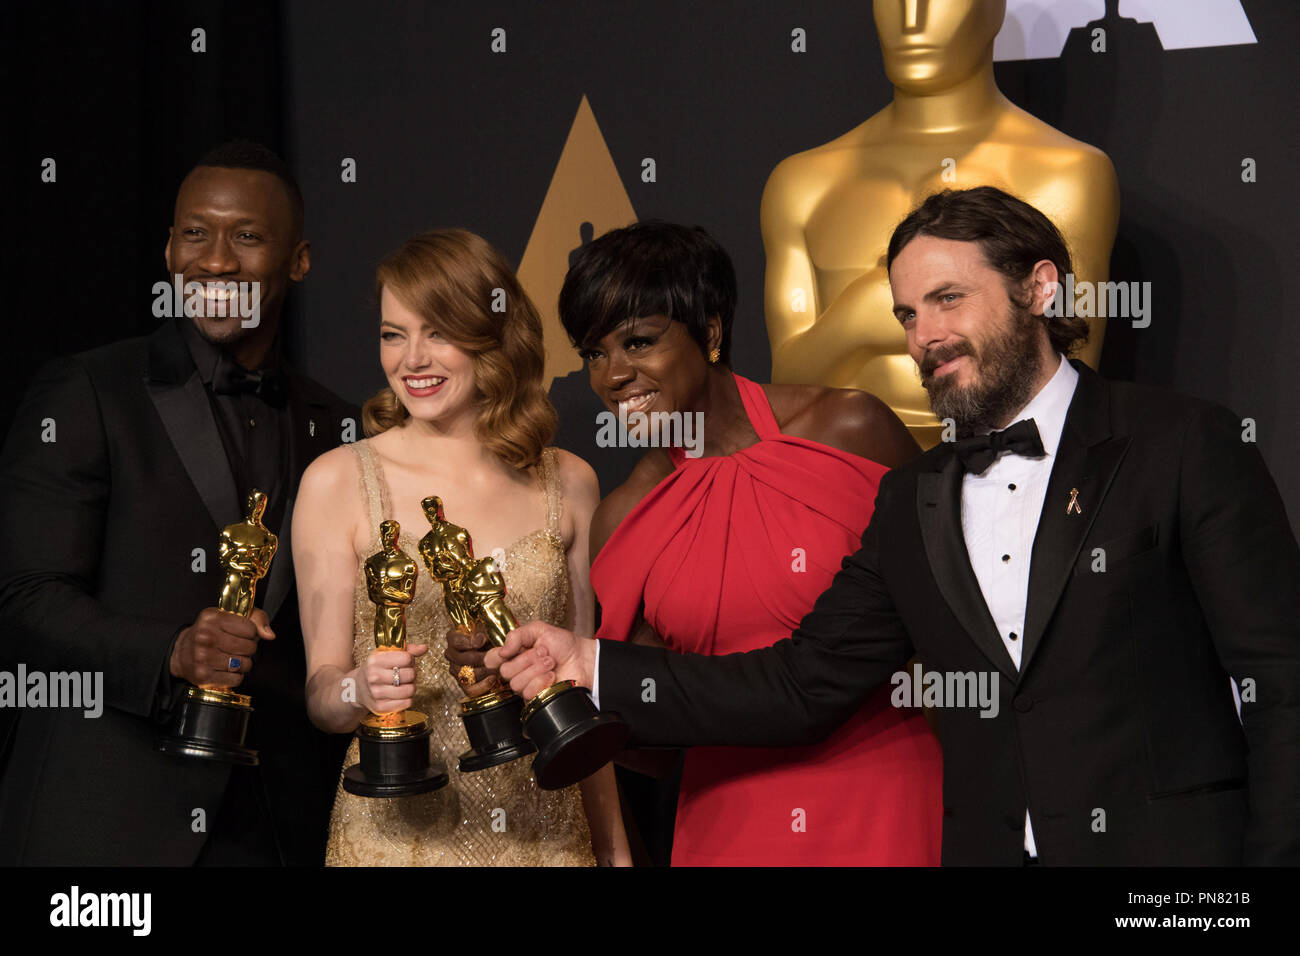 Backstage posing with their Oscars®, Mahershala Ali, Actor in a Supporting Role; Emma Stone, Actress in a Leading Role; Viola Davis, Actress in a Supporting Role; and Casey Affleck, Actor in a Leading Role backstage during The 89th Oscars® at the Dolby® Theatre in Hollywood, CA on Sunday, February 26, 2017.  File Reference # 33242 552THA  For Editorial Use Only -  All Rights Reserved Stock Photo